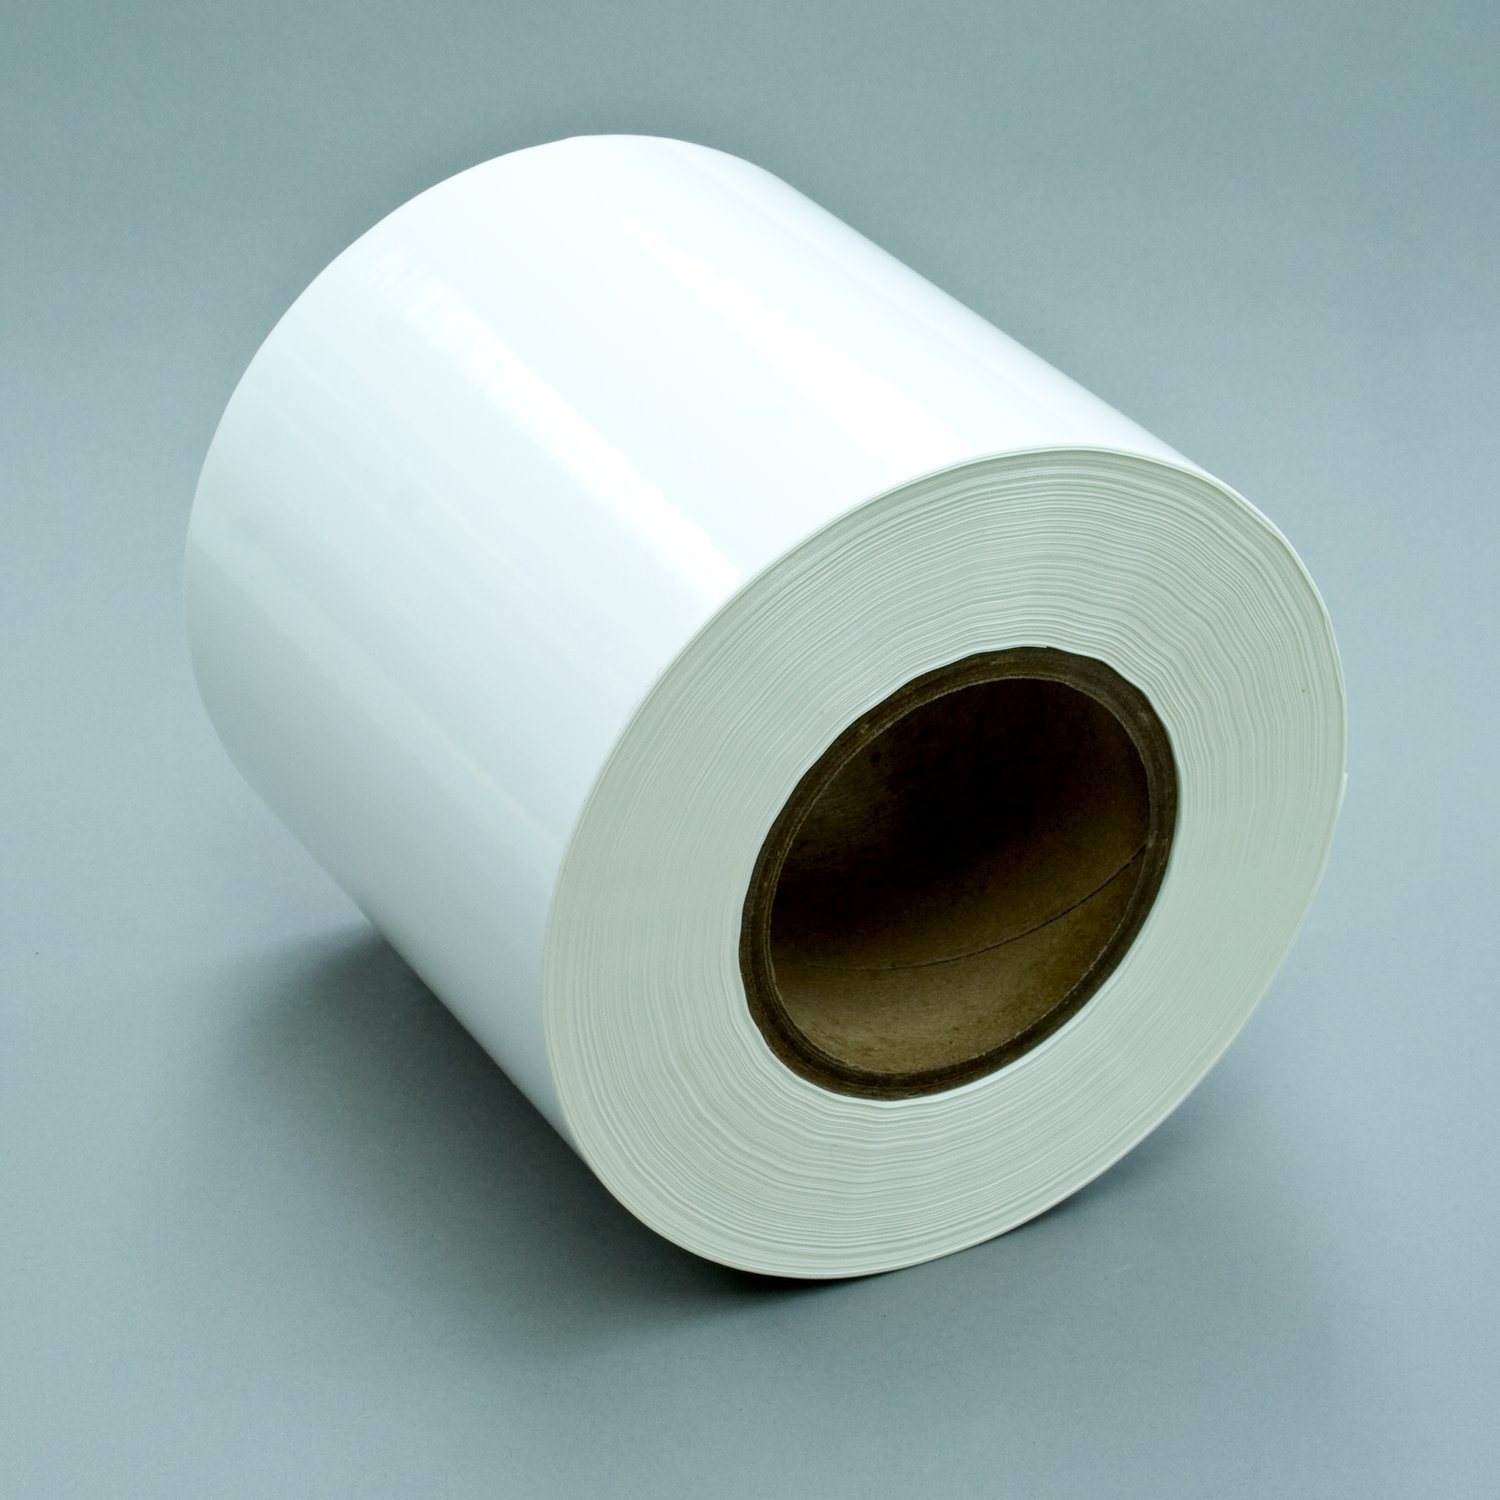 7000122358 - 3M Thermal Transfer Label Material OFM2902, Brushed Silver Polyester, 6
in x 1668 ft, 1 Roll/Case